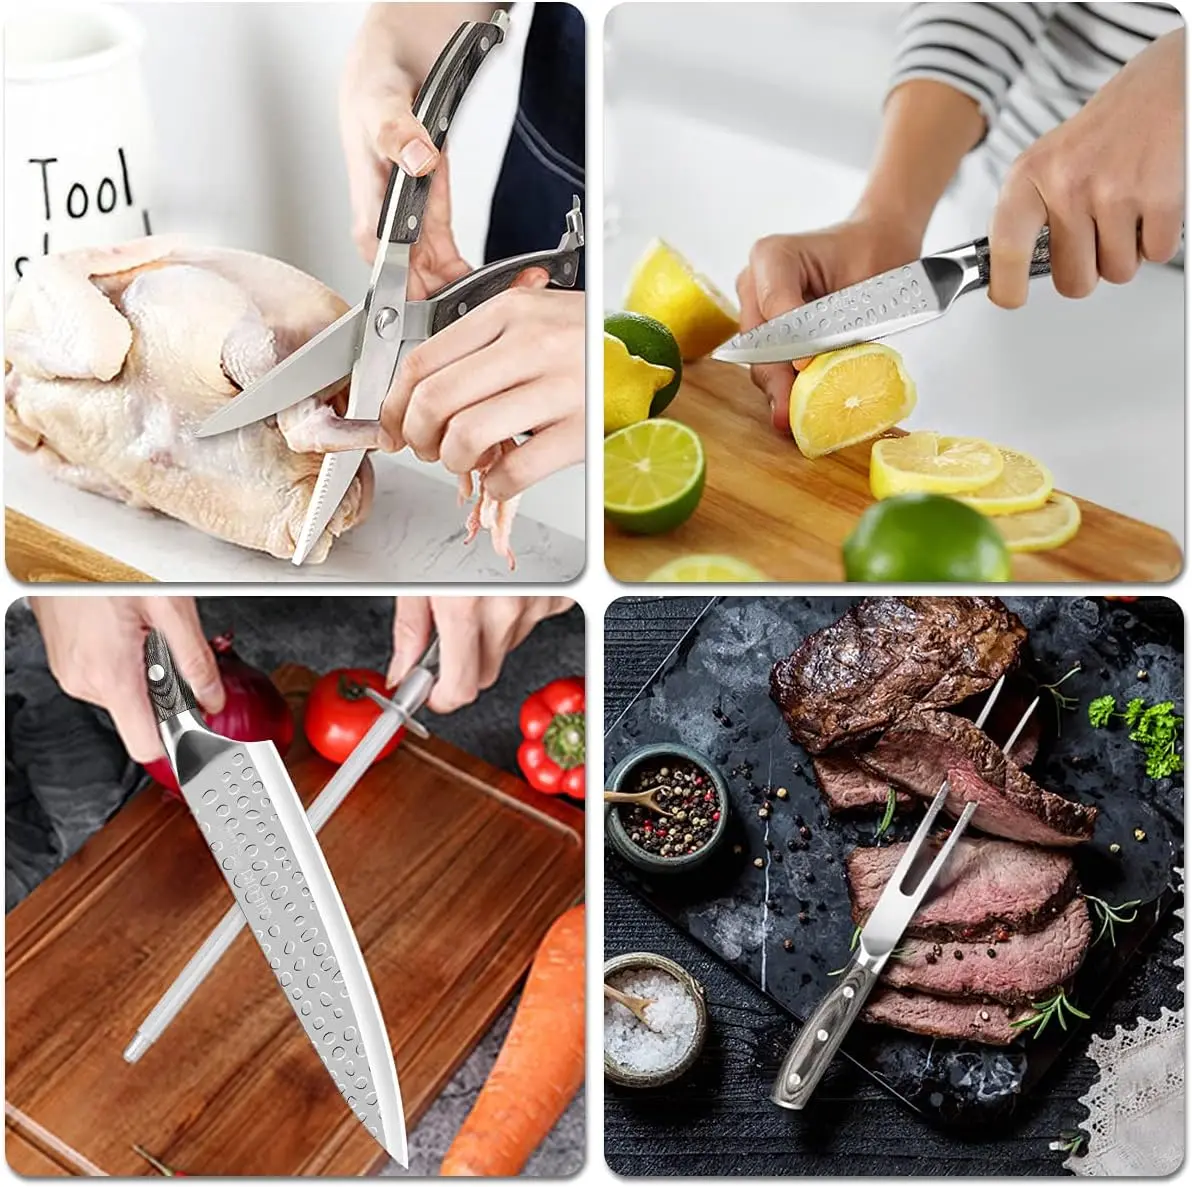 https://ae01.alicdn.com/kf/S99dfb5b8eee044f68f5fc9e8246a0f61d/Set-21-PCS-Kitchen-Knife-Set-with-Block-Wooden-Japanese-Stainless-Steel-Professional-Chef-Knife-Set.jpg